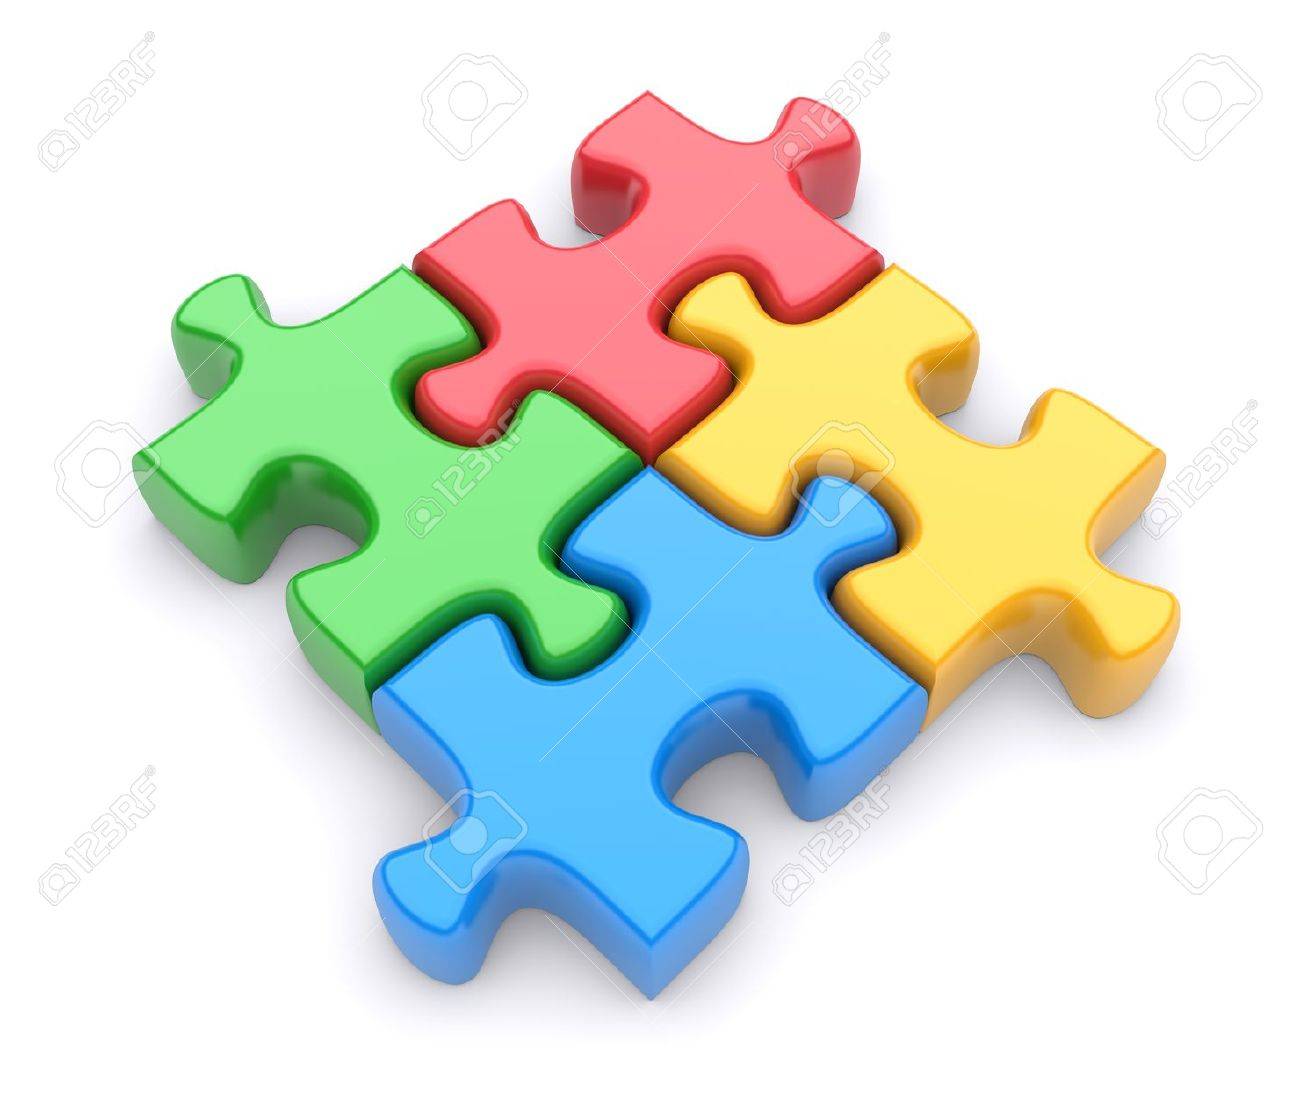 Jigsaw Puzzle On A White Background 3d Image Stock Photo Picture